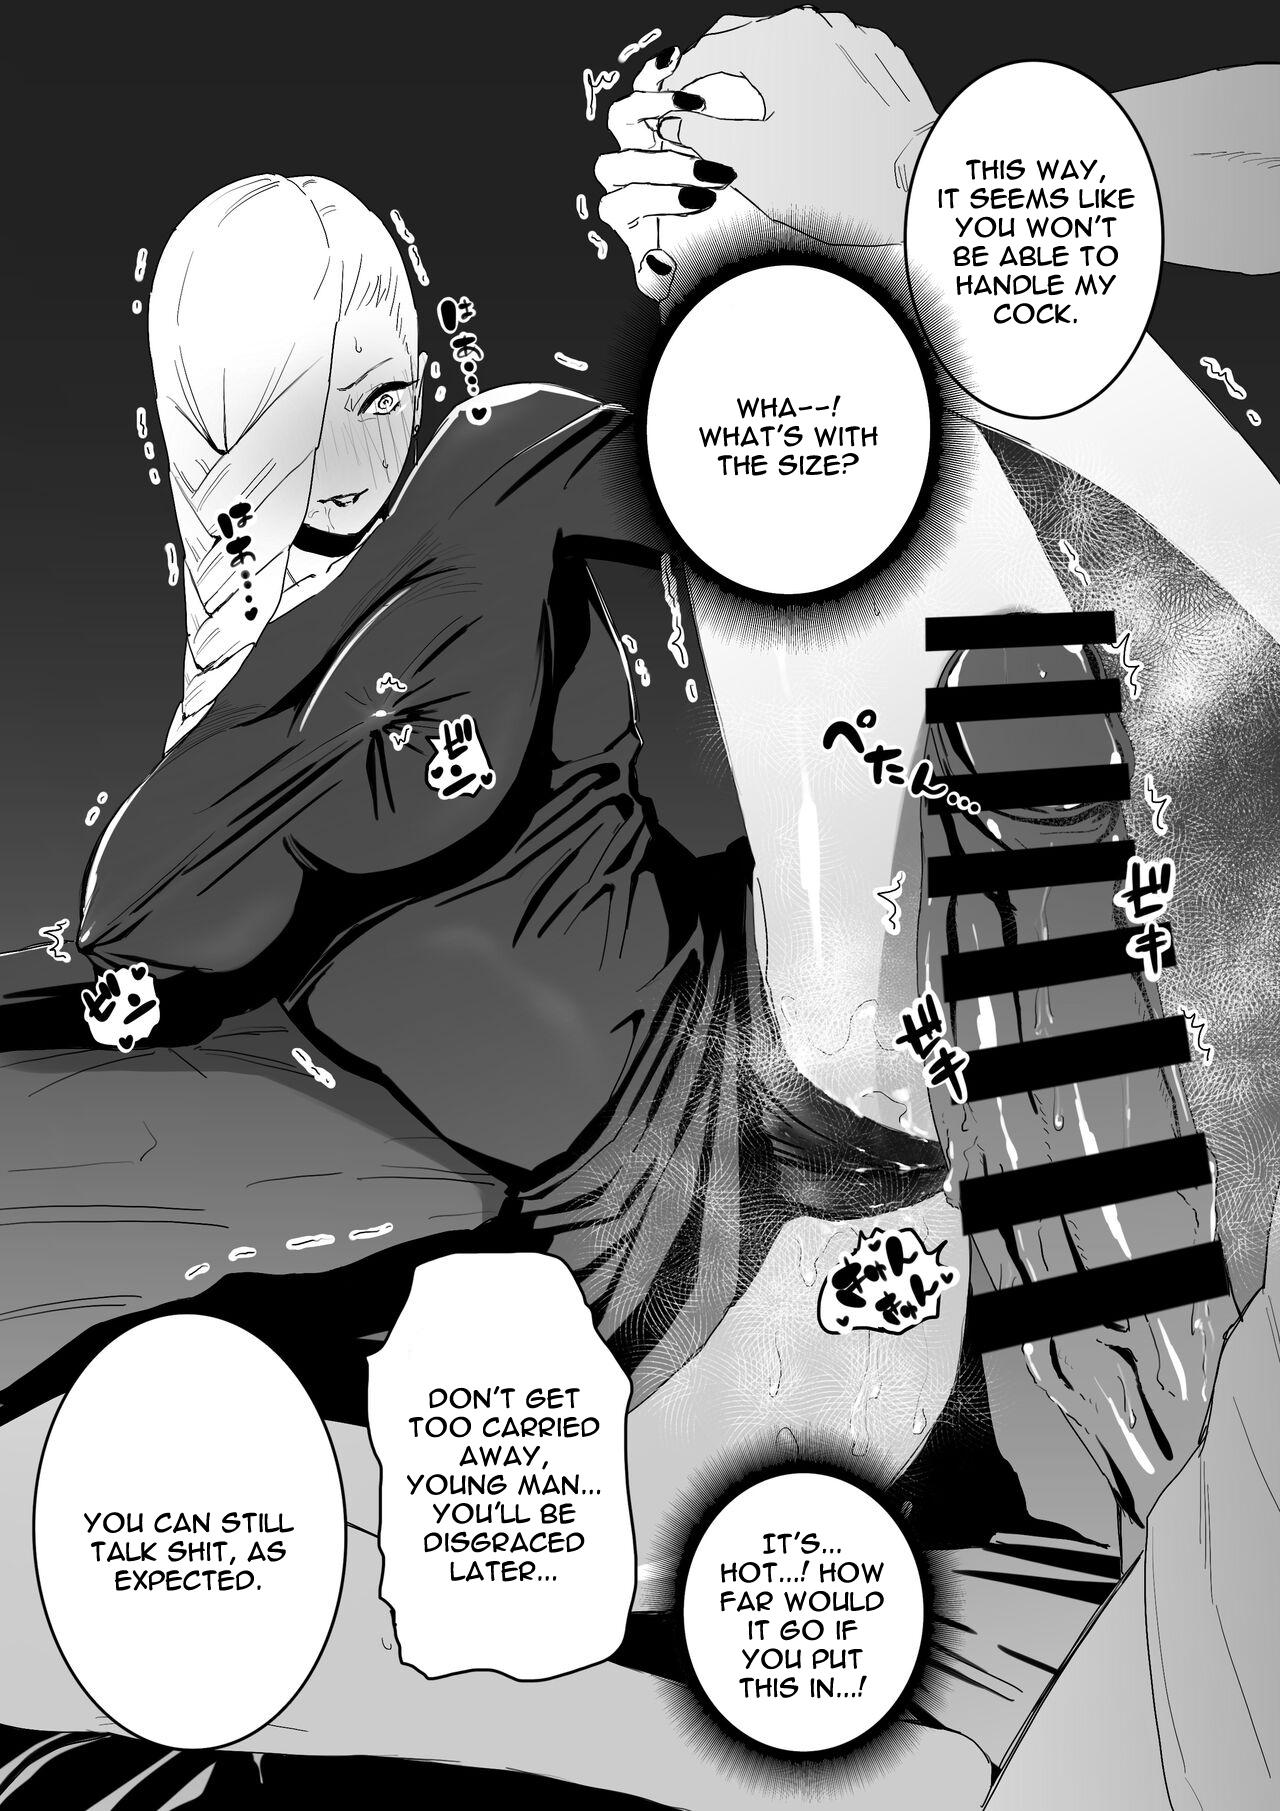 Chicks The picked up Meimei just becomes a za*n tank. - Jujutsu kaisen Hot - Page 7